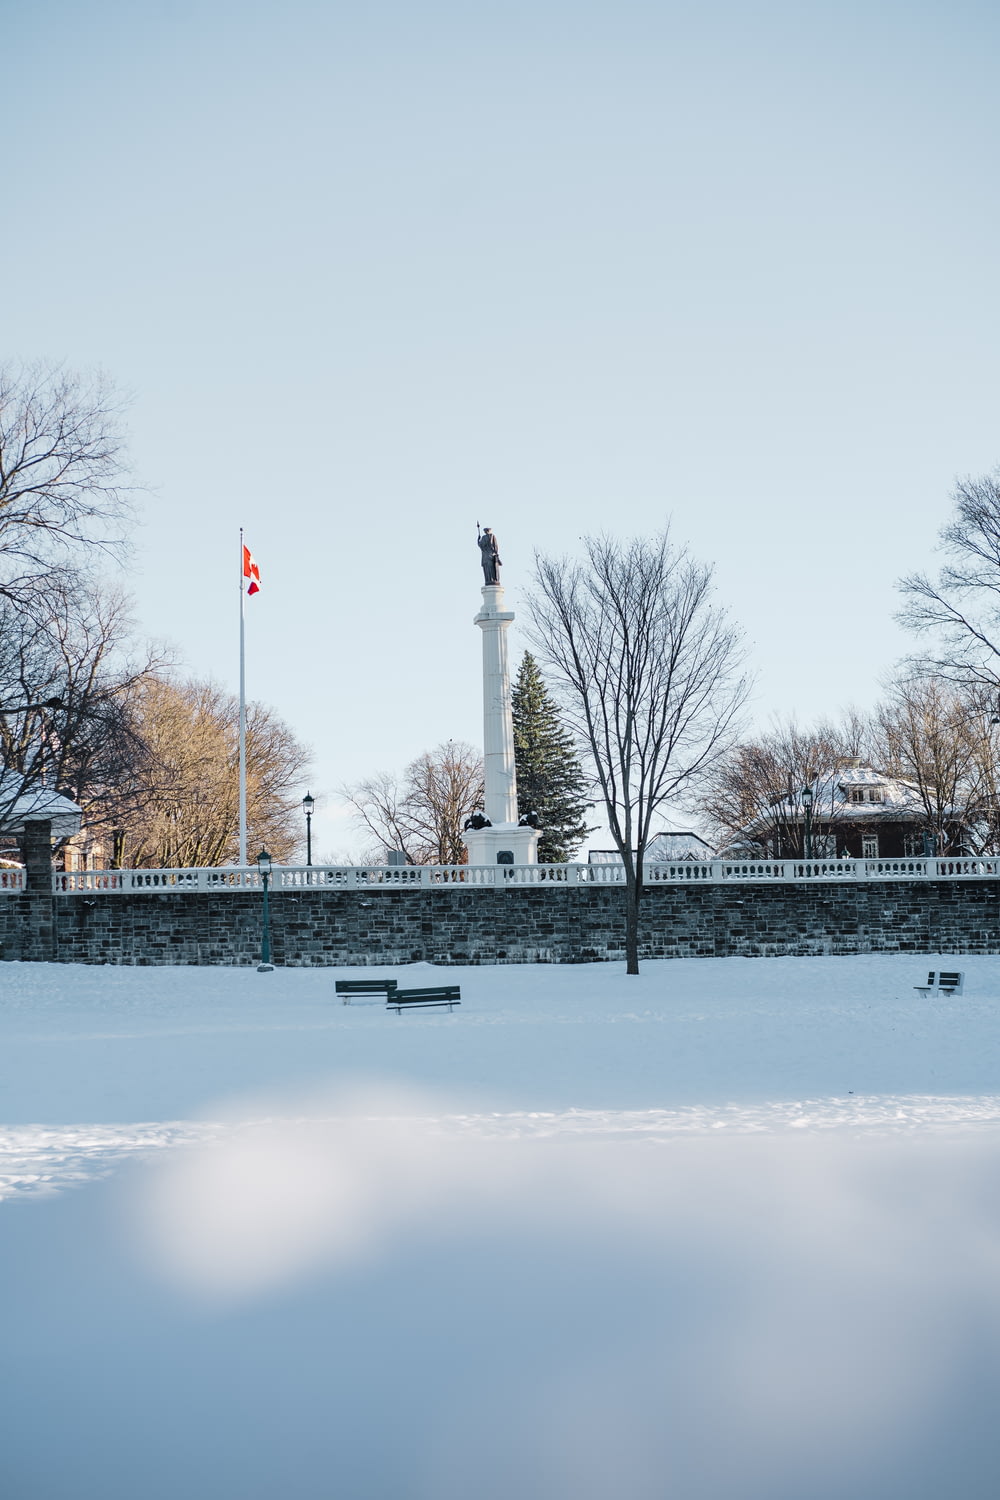 a snowy park with benches and a monument in the background